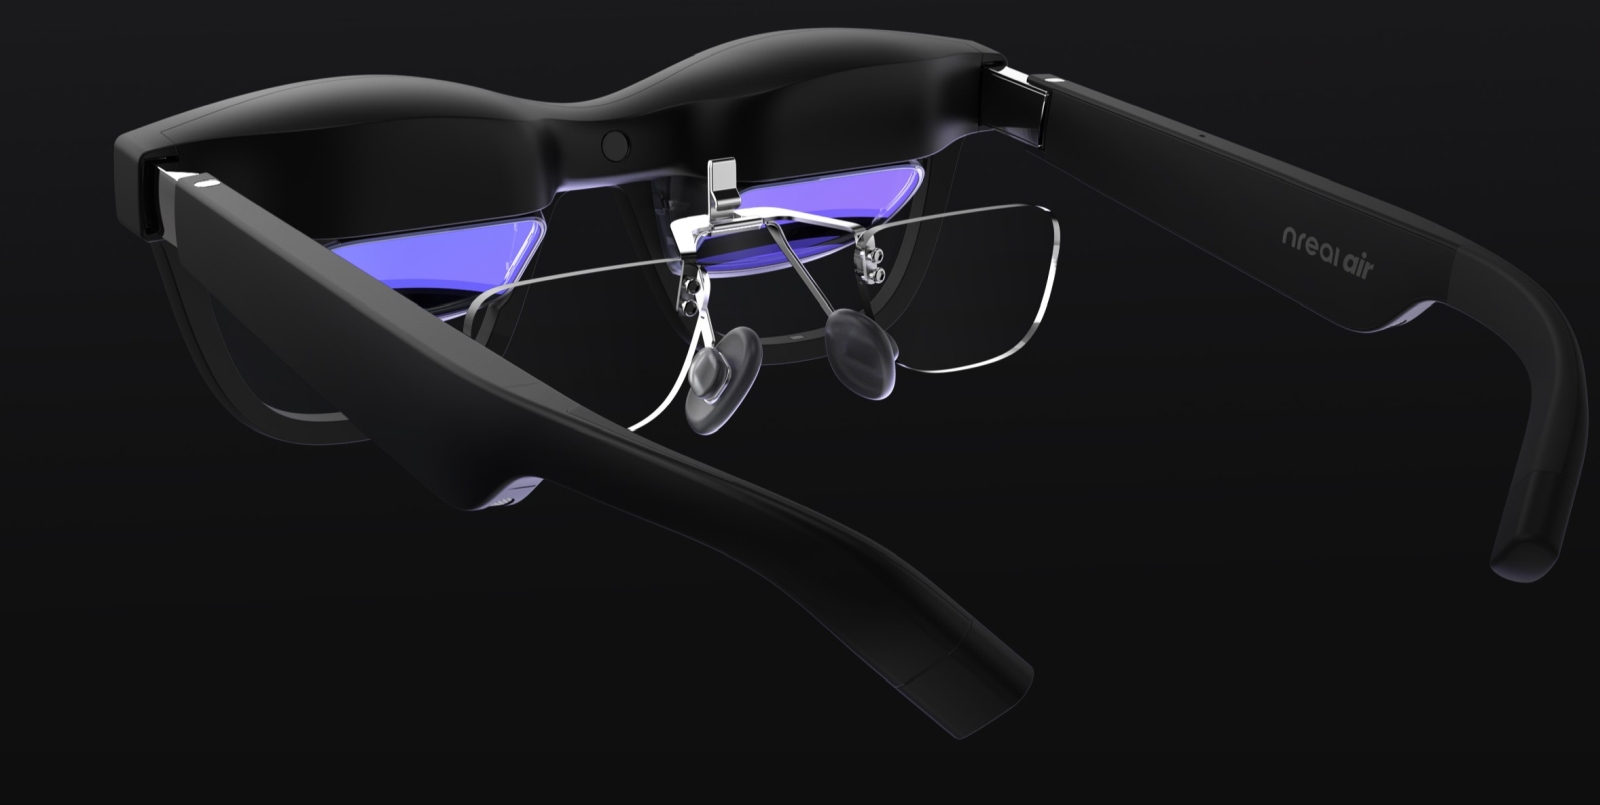 Hands on with the Nreal Air's augmented reality glasses - GAMING TREND